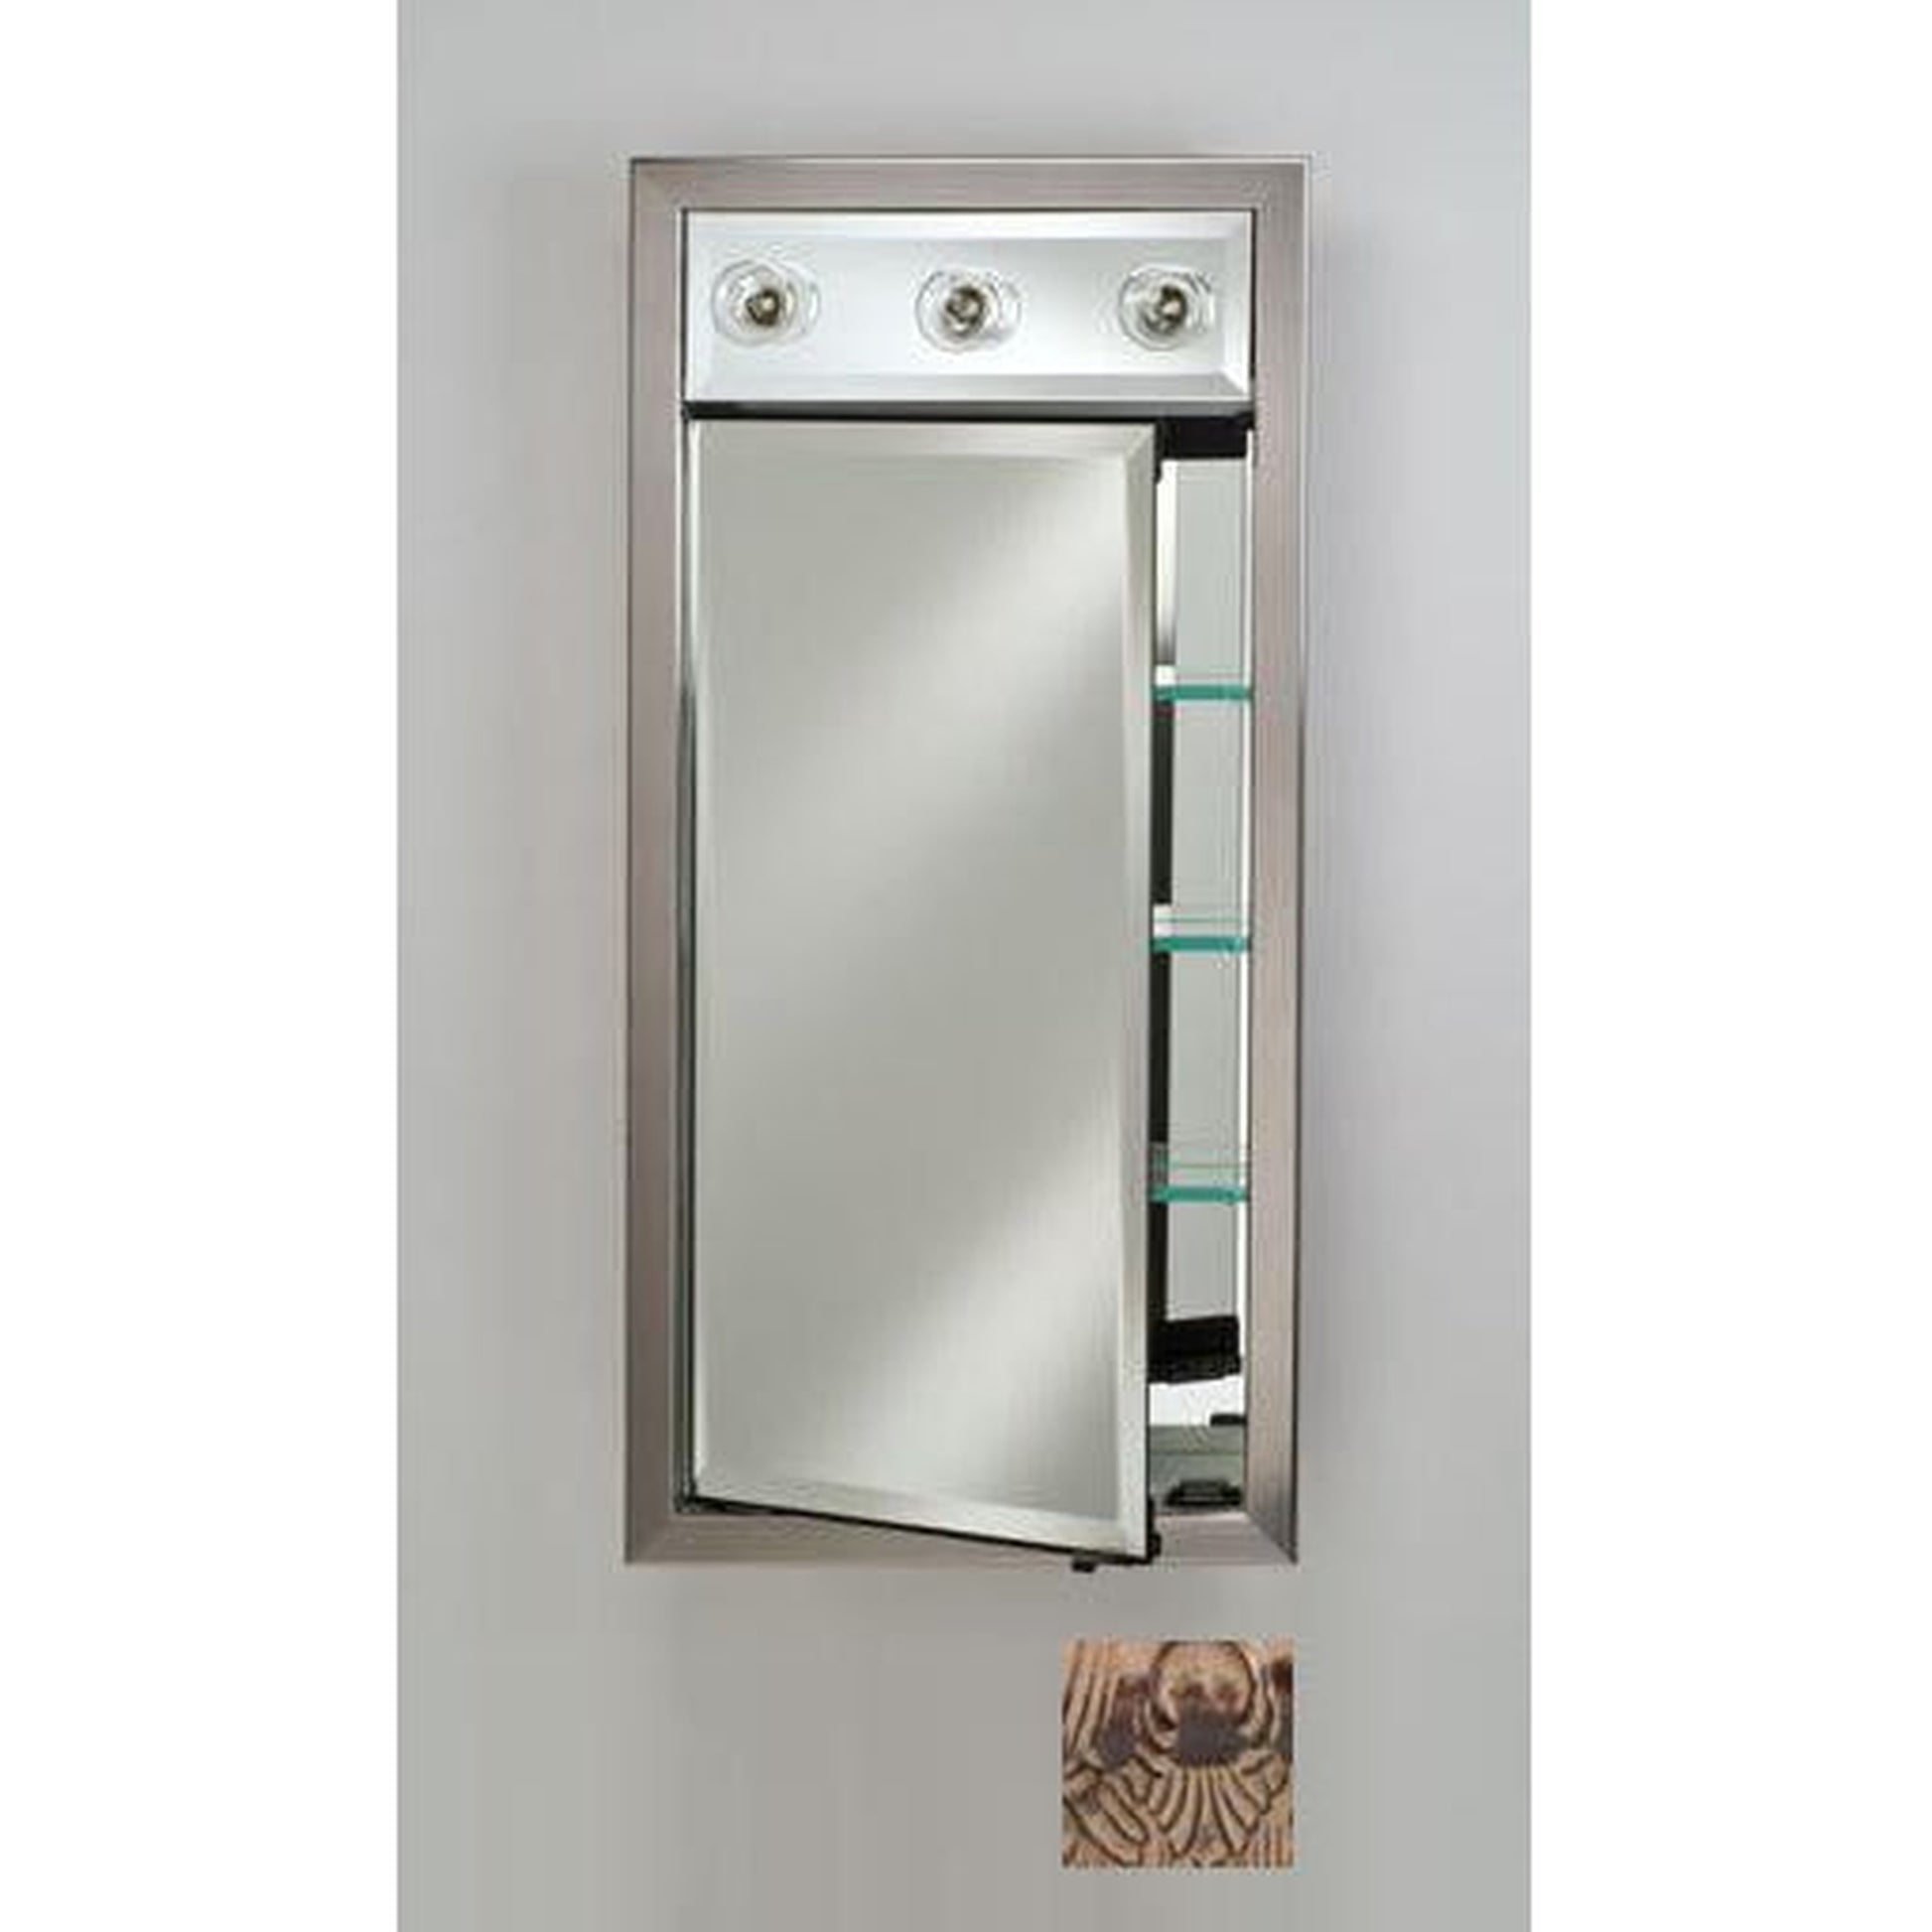 Afina Signature 17" x 30" Siena Antique Oiled Bronze Recessed Left Hinged Single Door Medicine Cabinet With Contemporary Lights